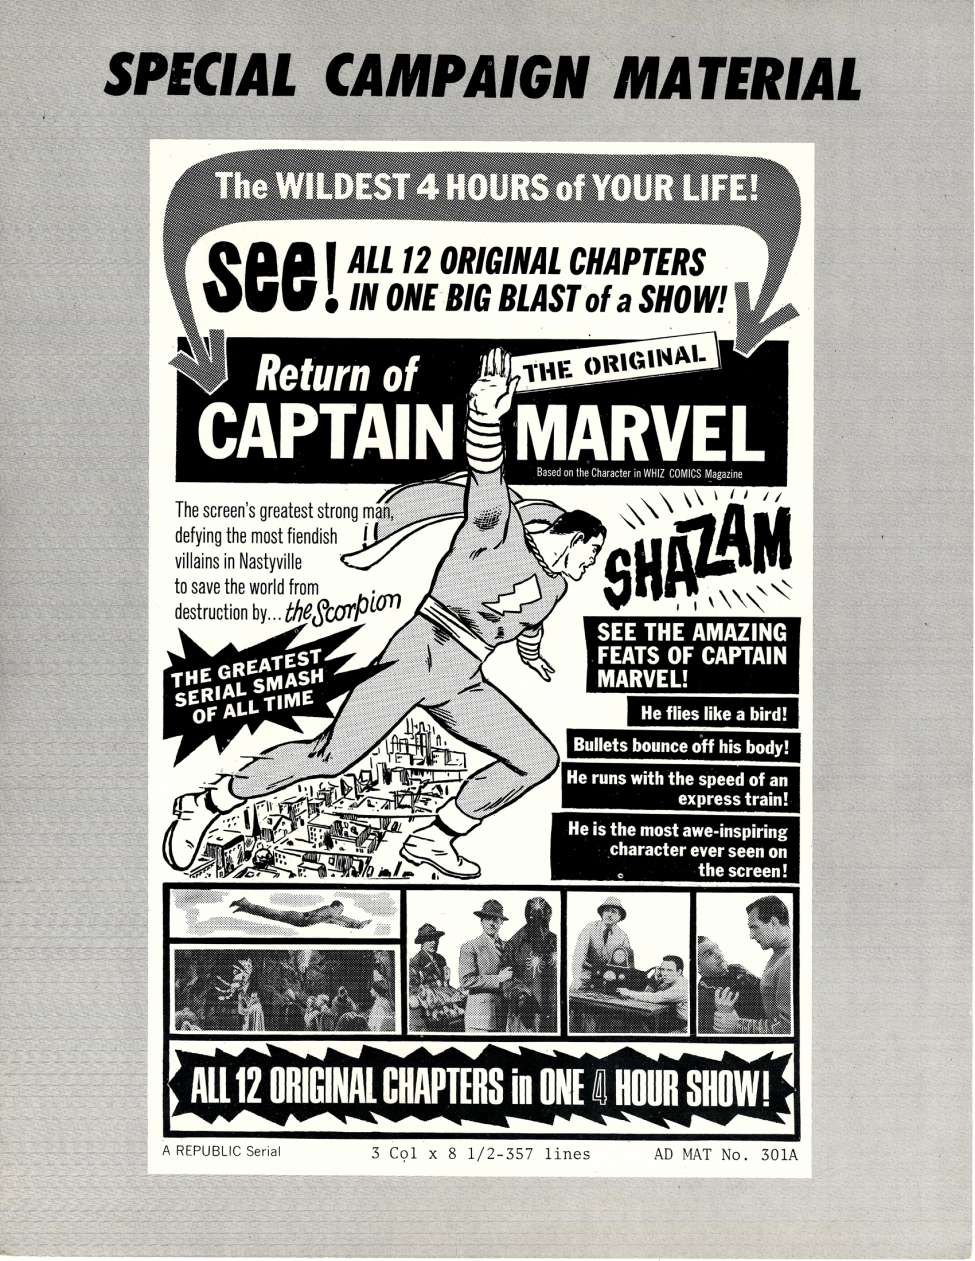 Book Cover For Captain Marvel Serial 1966 Re-Release Pressbook